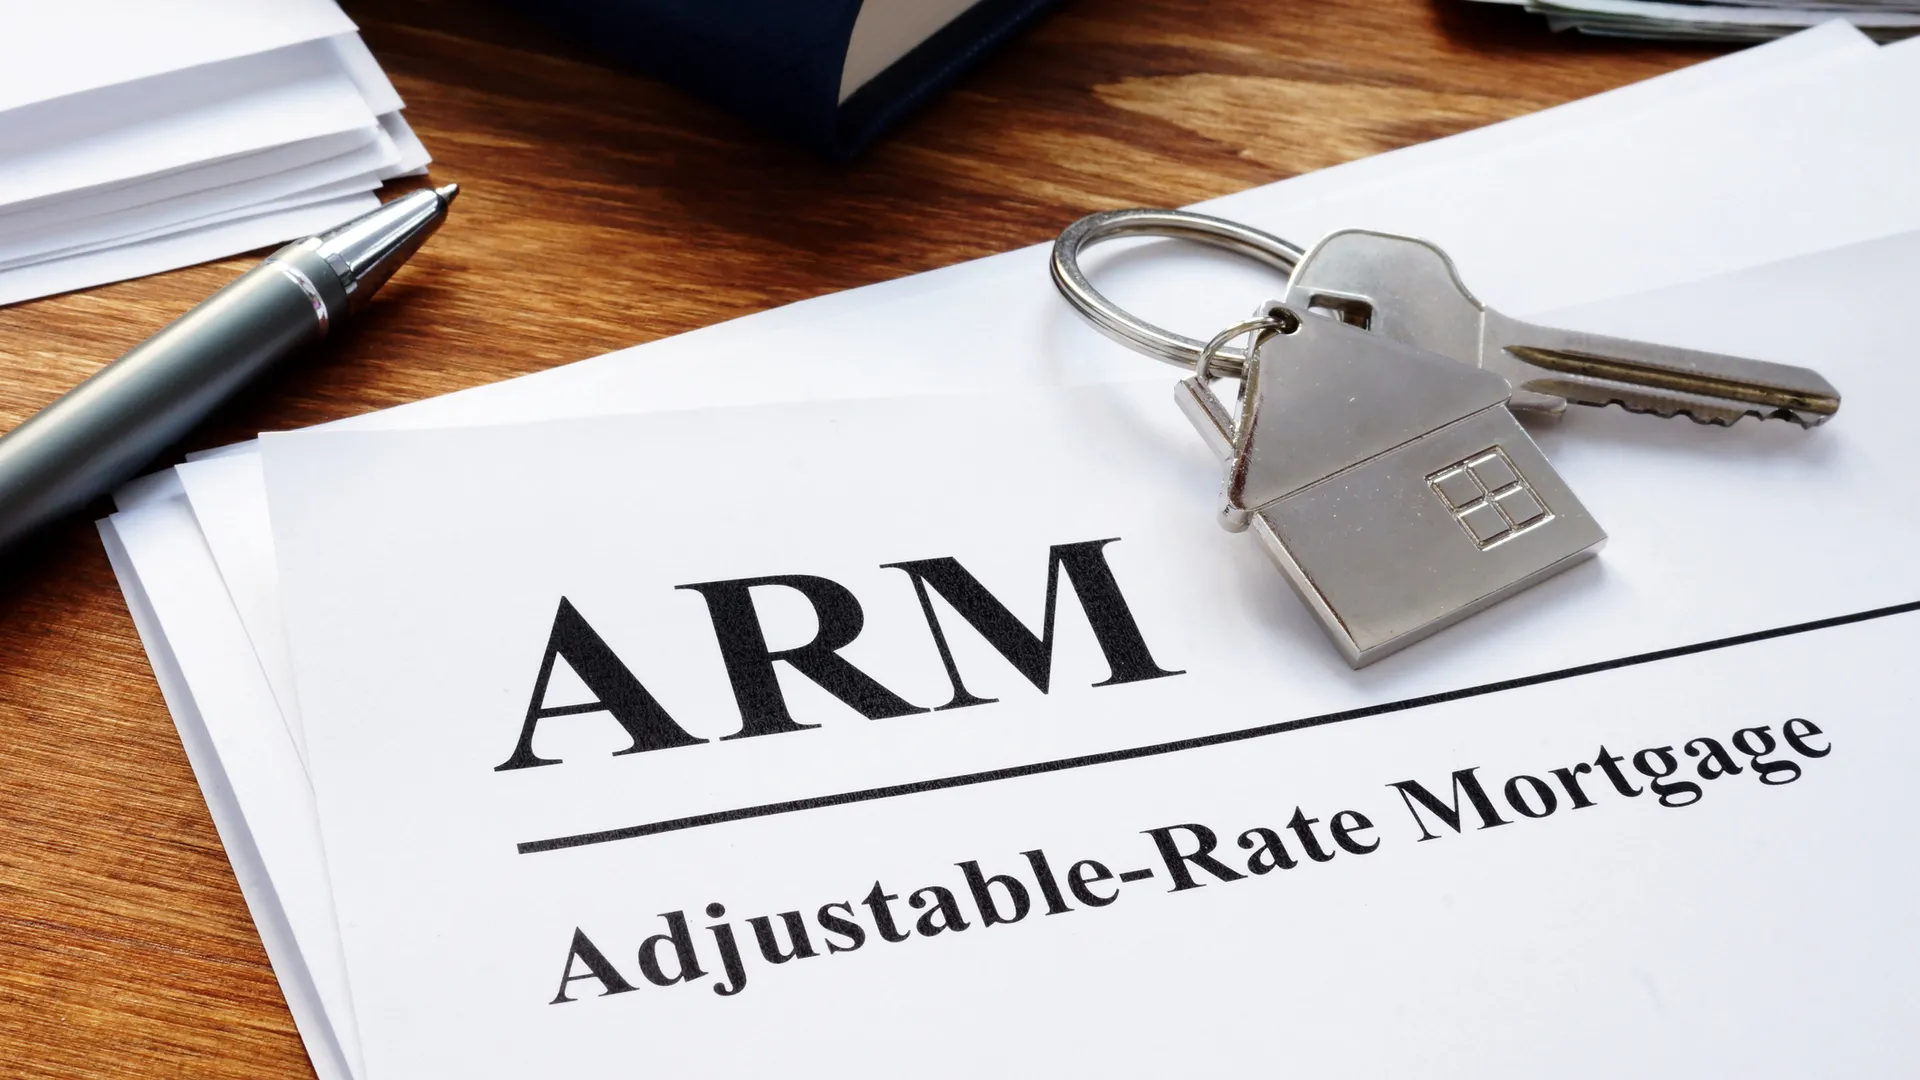 Adjustable Rate Mortgage ARM papers in the office.